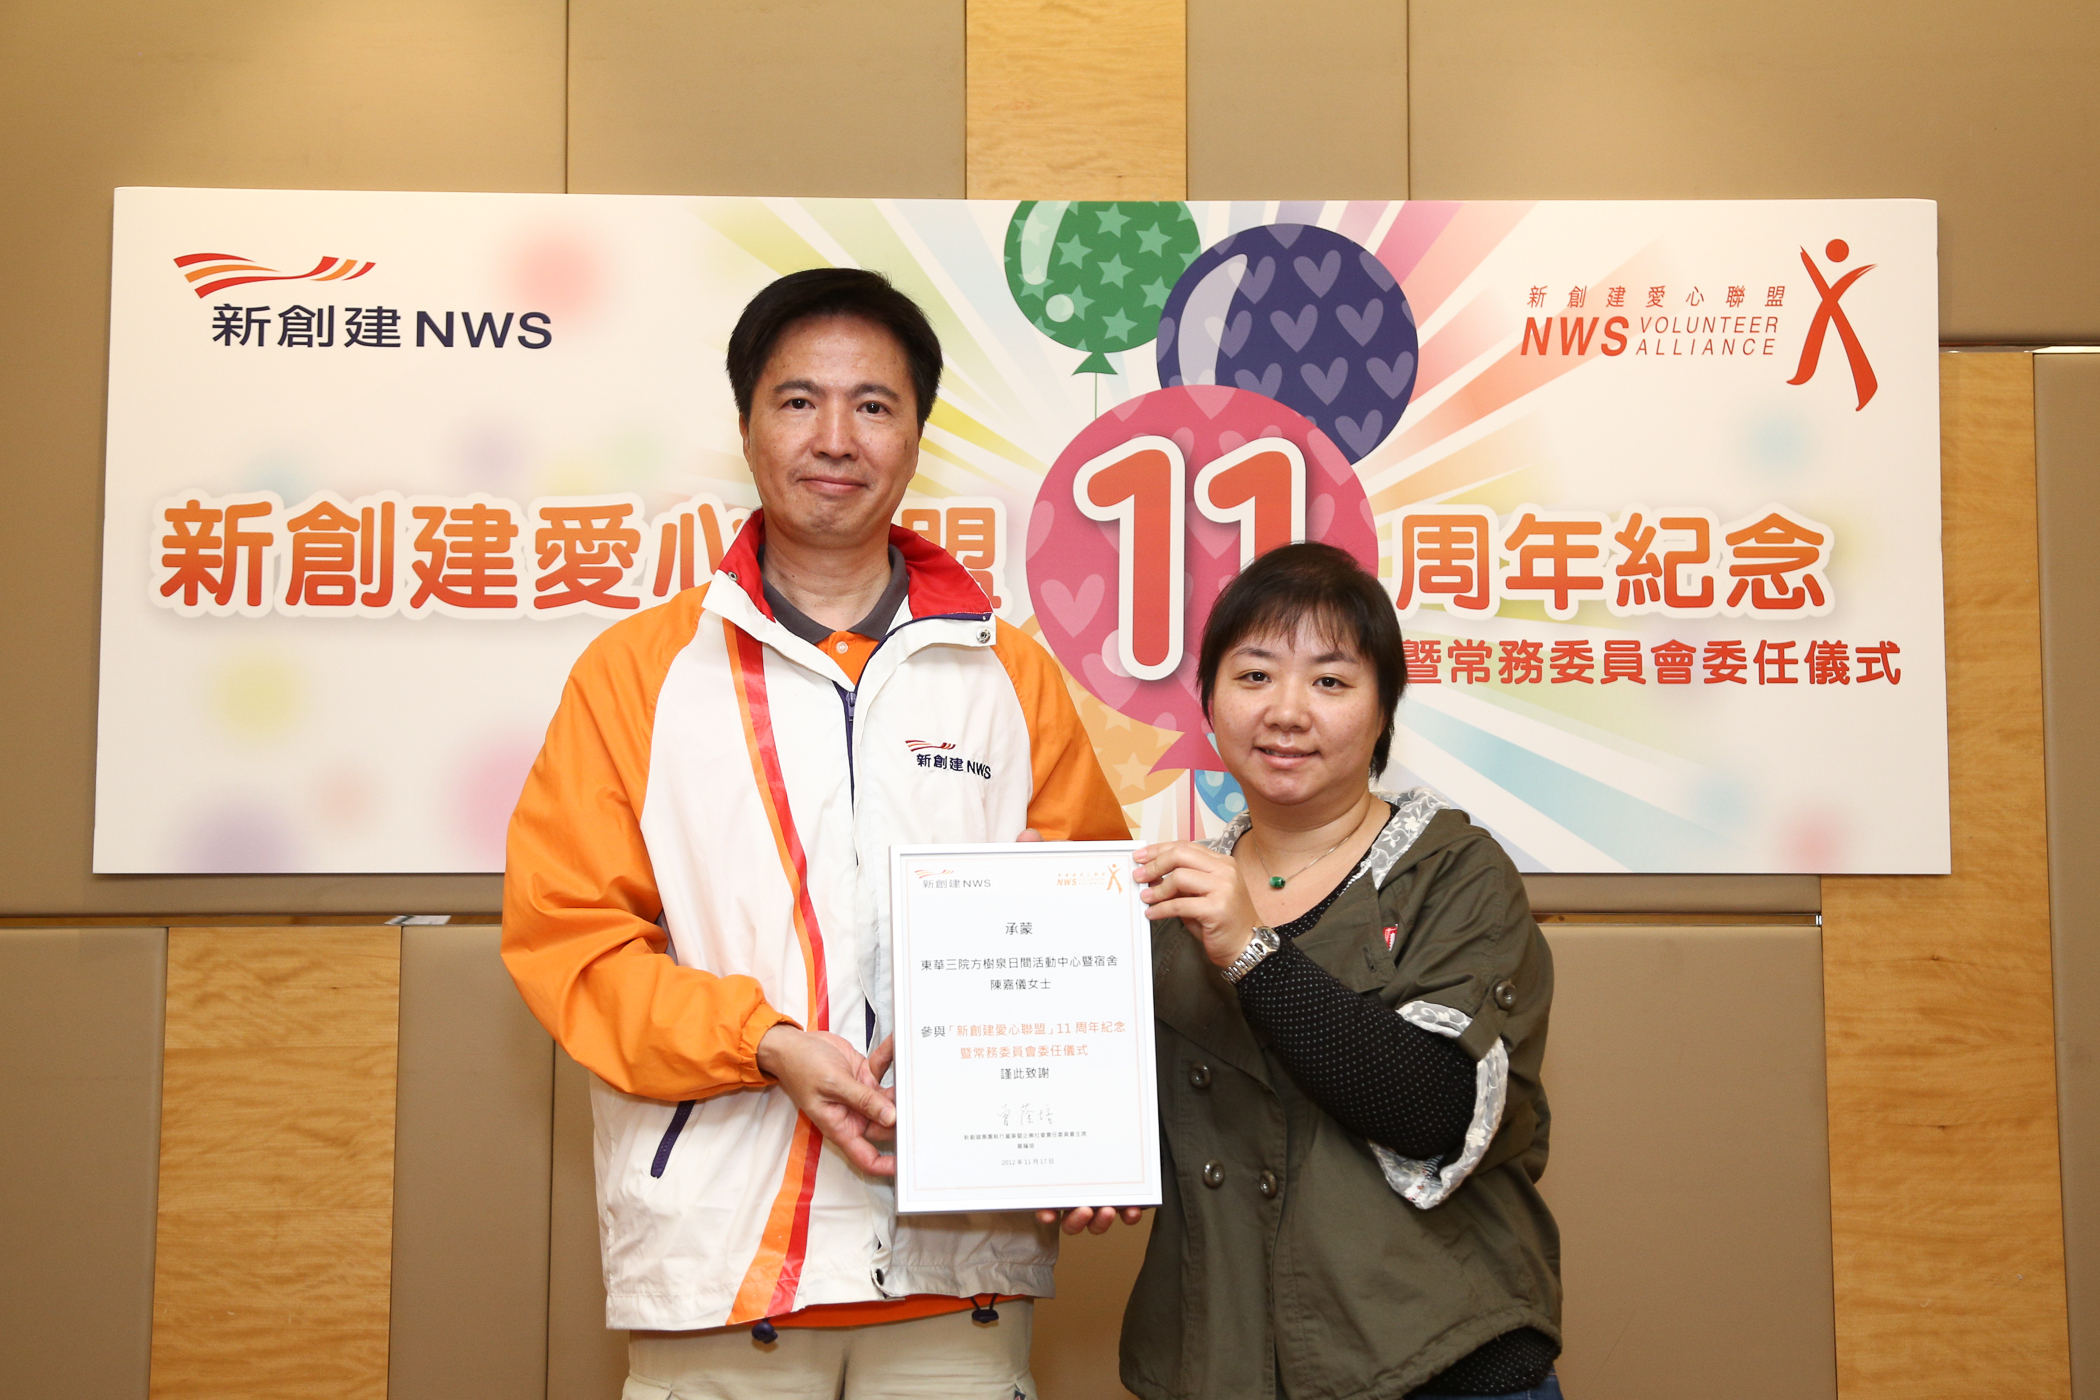 NWS Volunteer Alliance 11th Anniversary Celebration cum Inauguration Ceremony (Chinese version only)